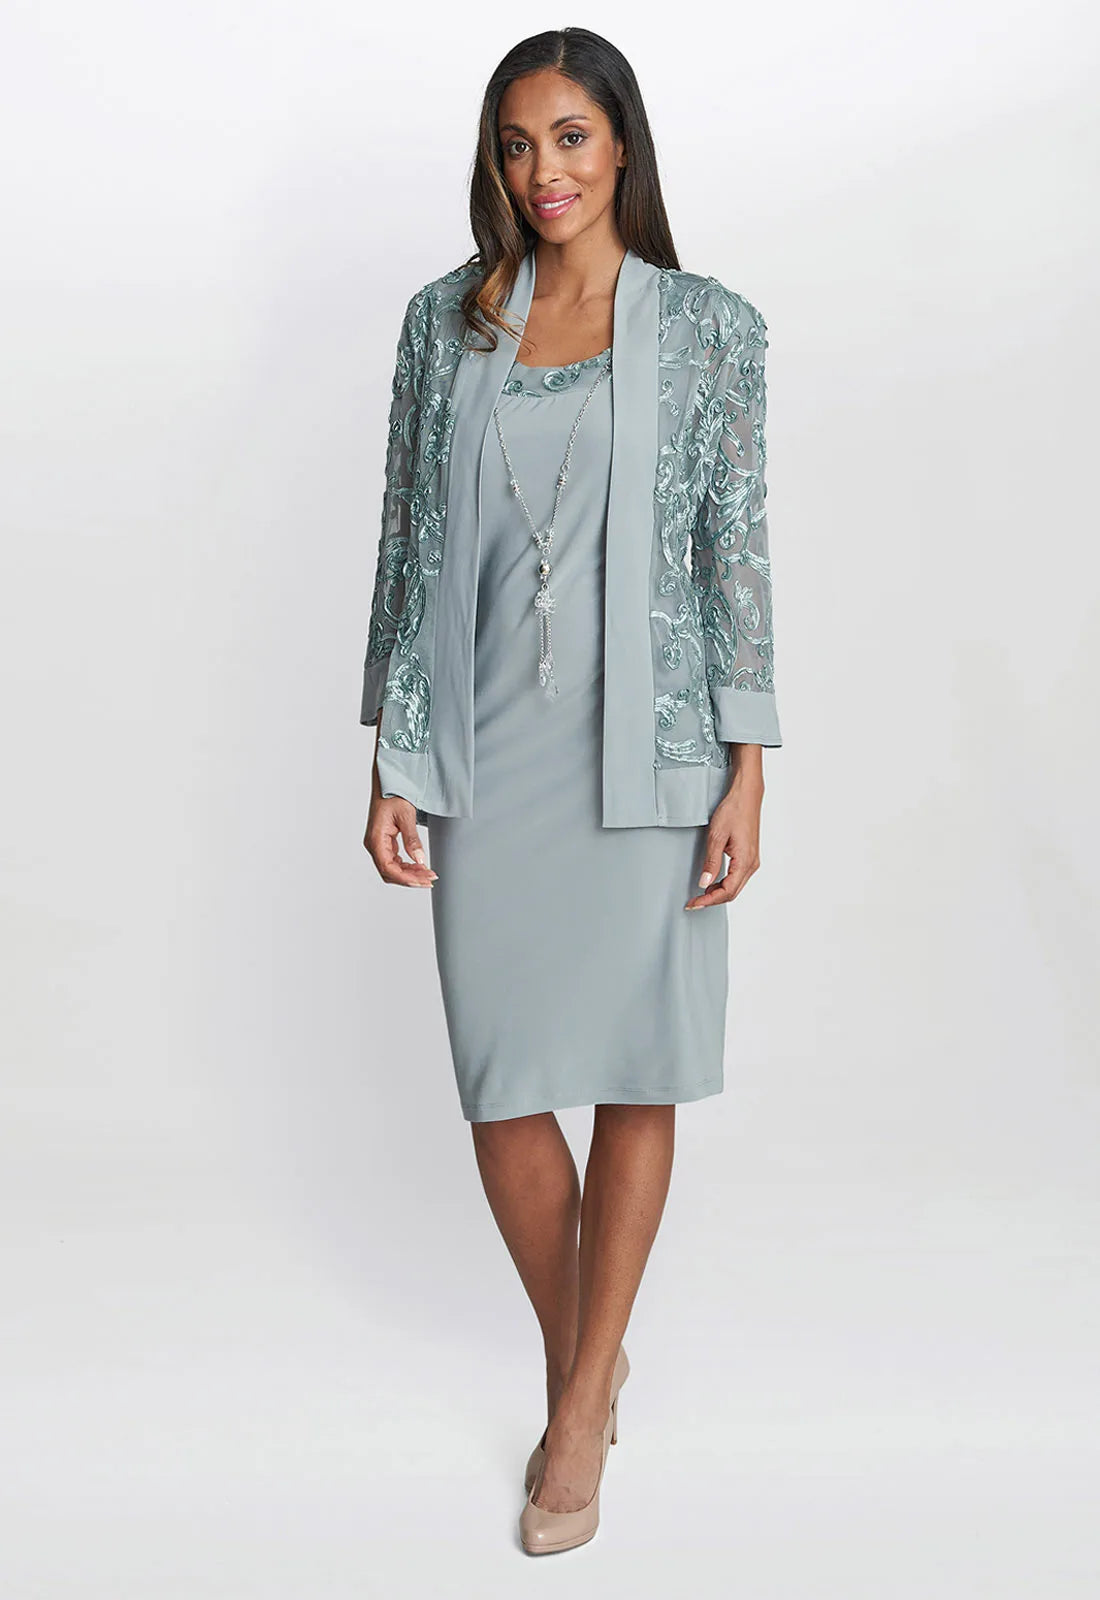 Gina Bacconi Sage Beverley Dress and Jacket with Necklace